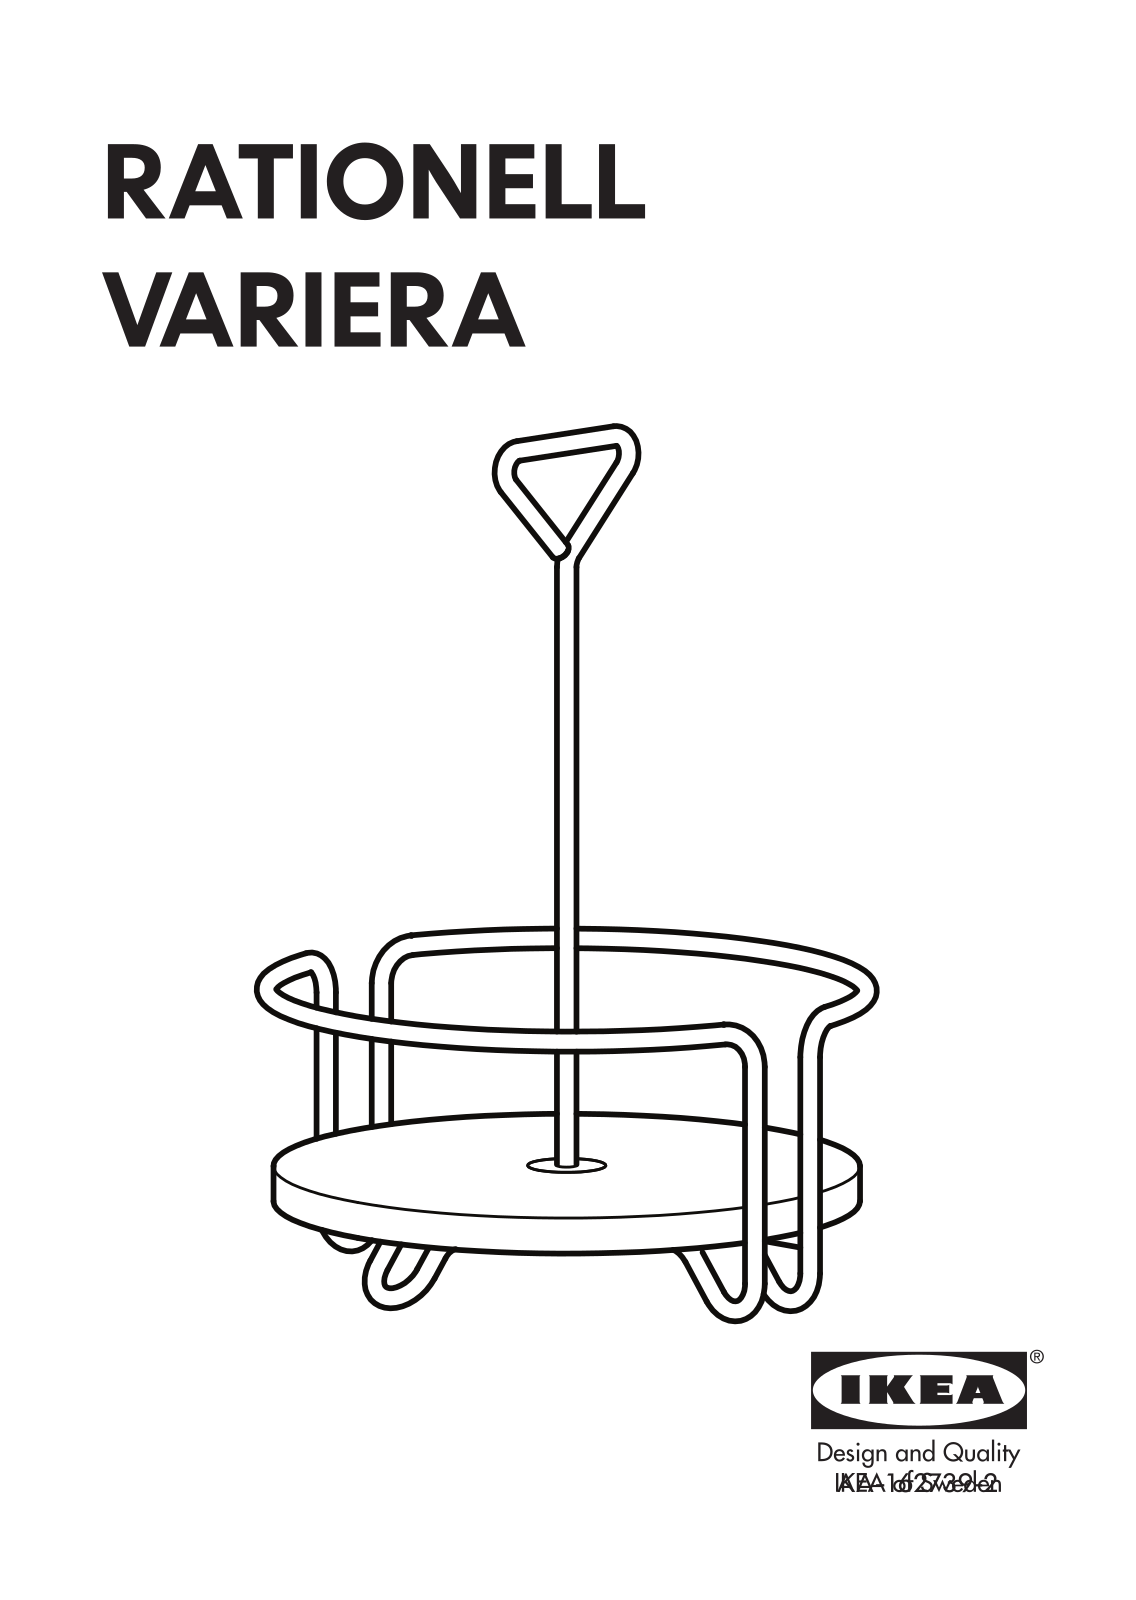 IKEA RATIONELL VARIERA CONDIMENT STAND Assembly Instruction